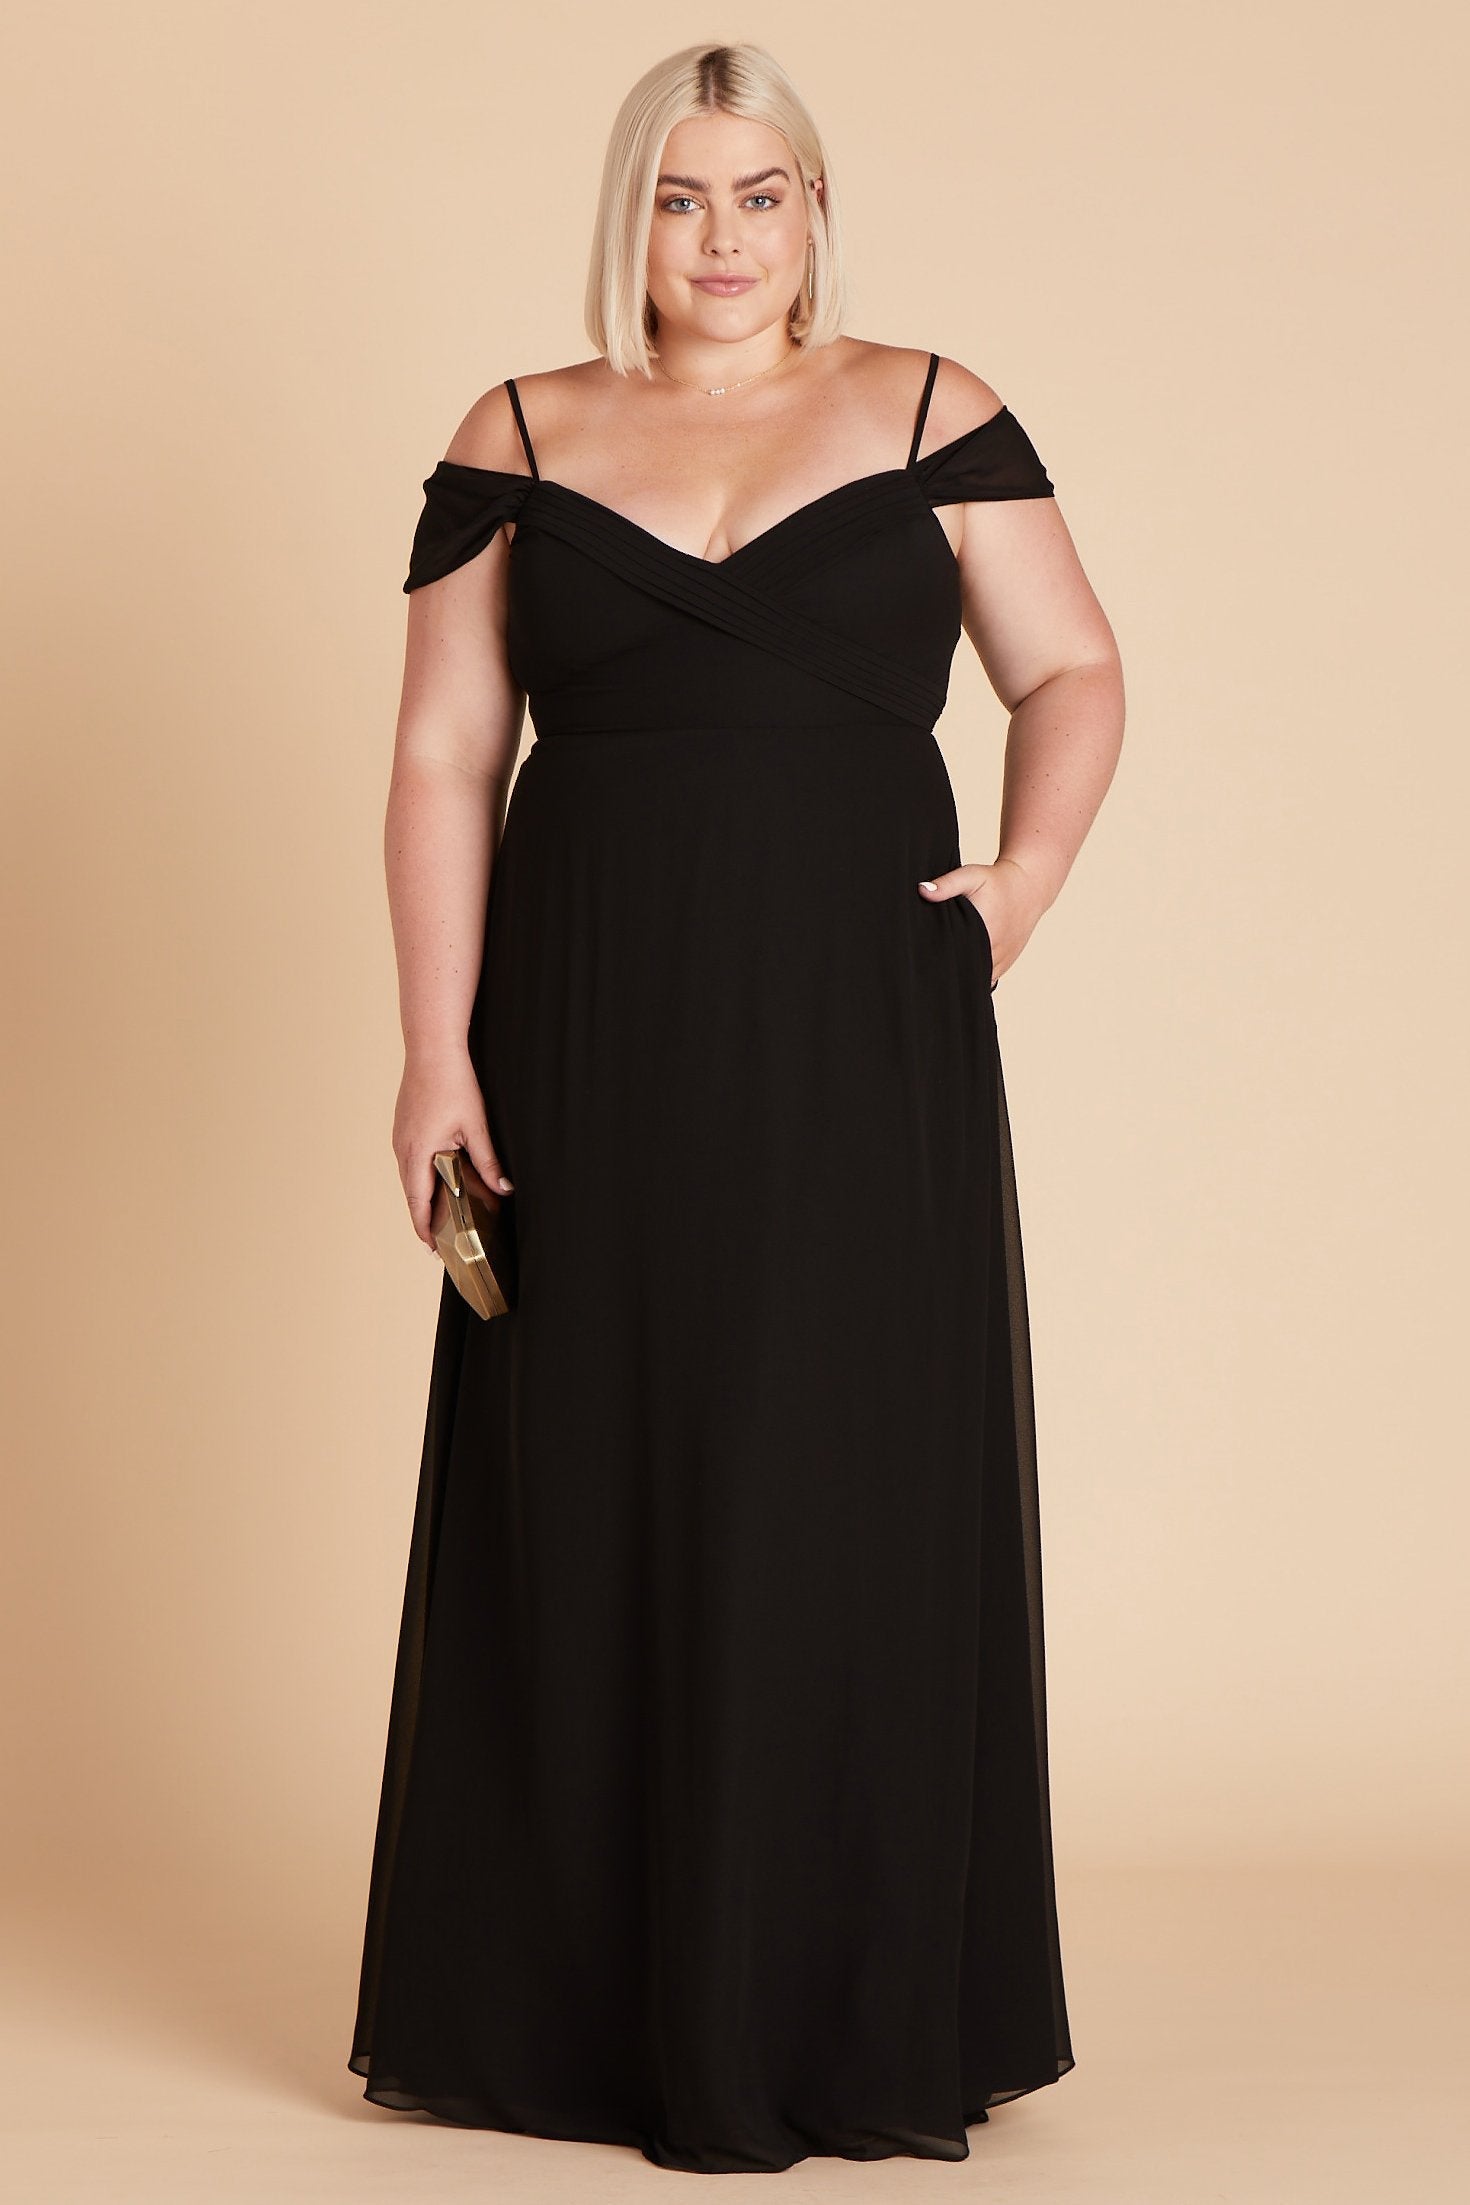 Spence convertible plus size bridesmaid dress in black chiffon by Birdy Grey, front view with hand in pocket 